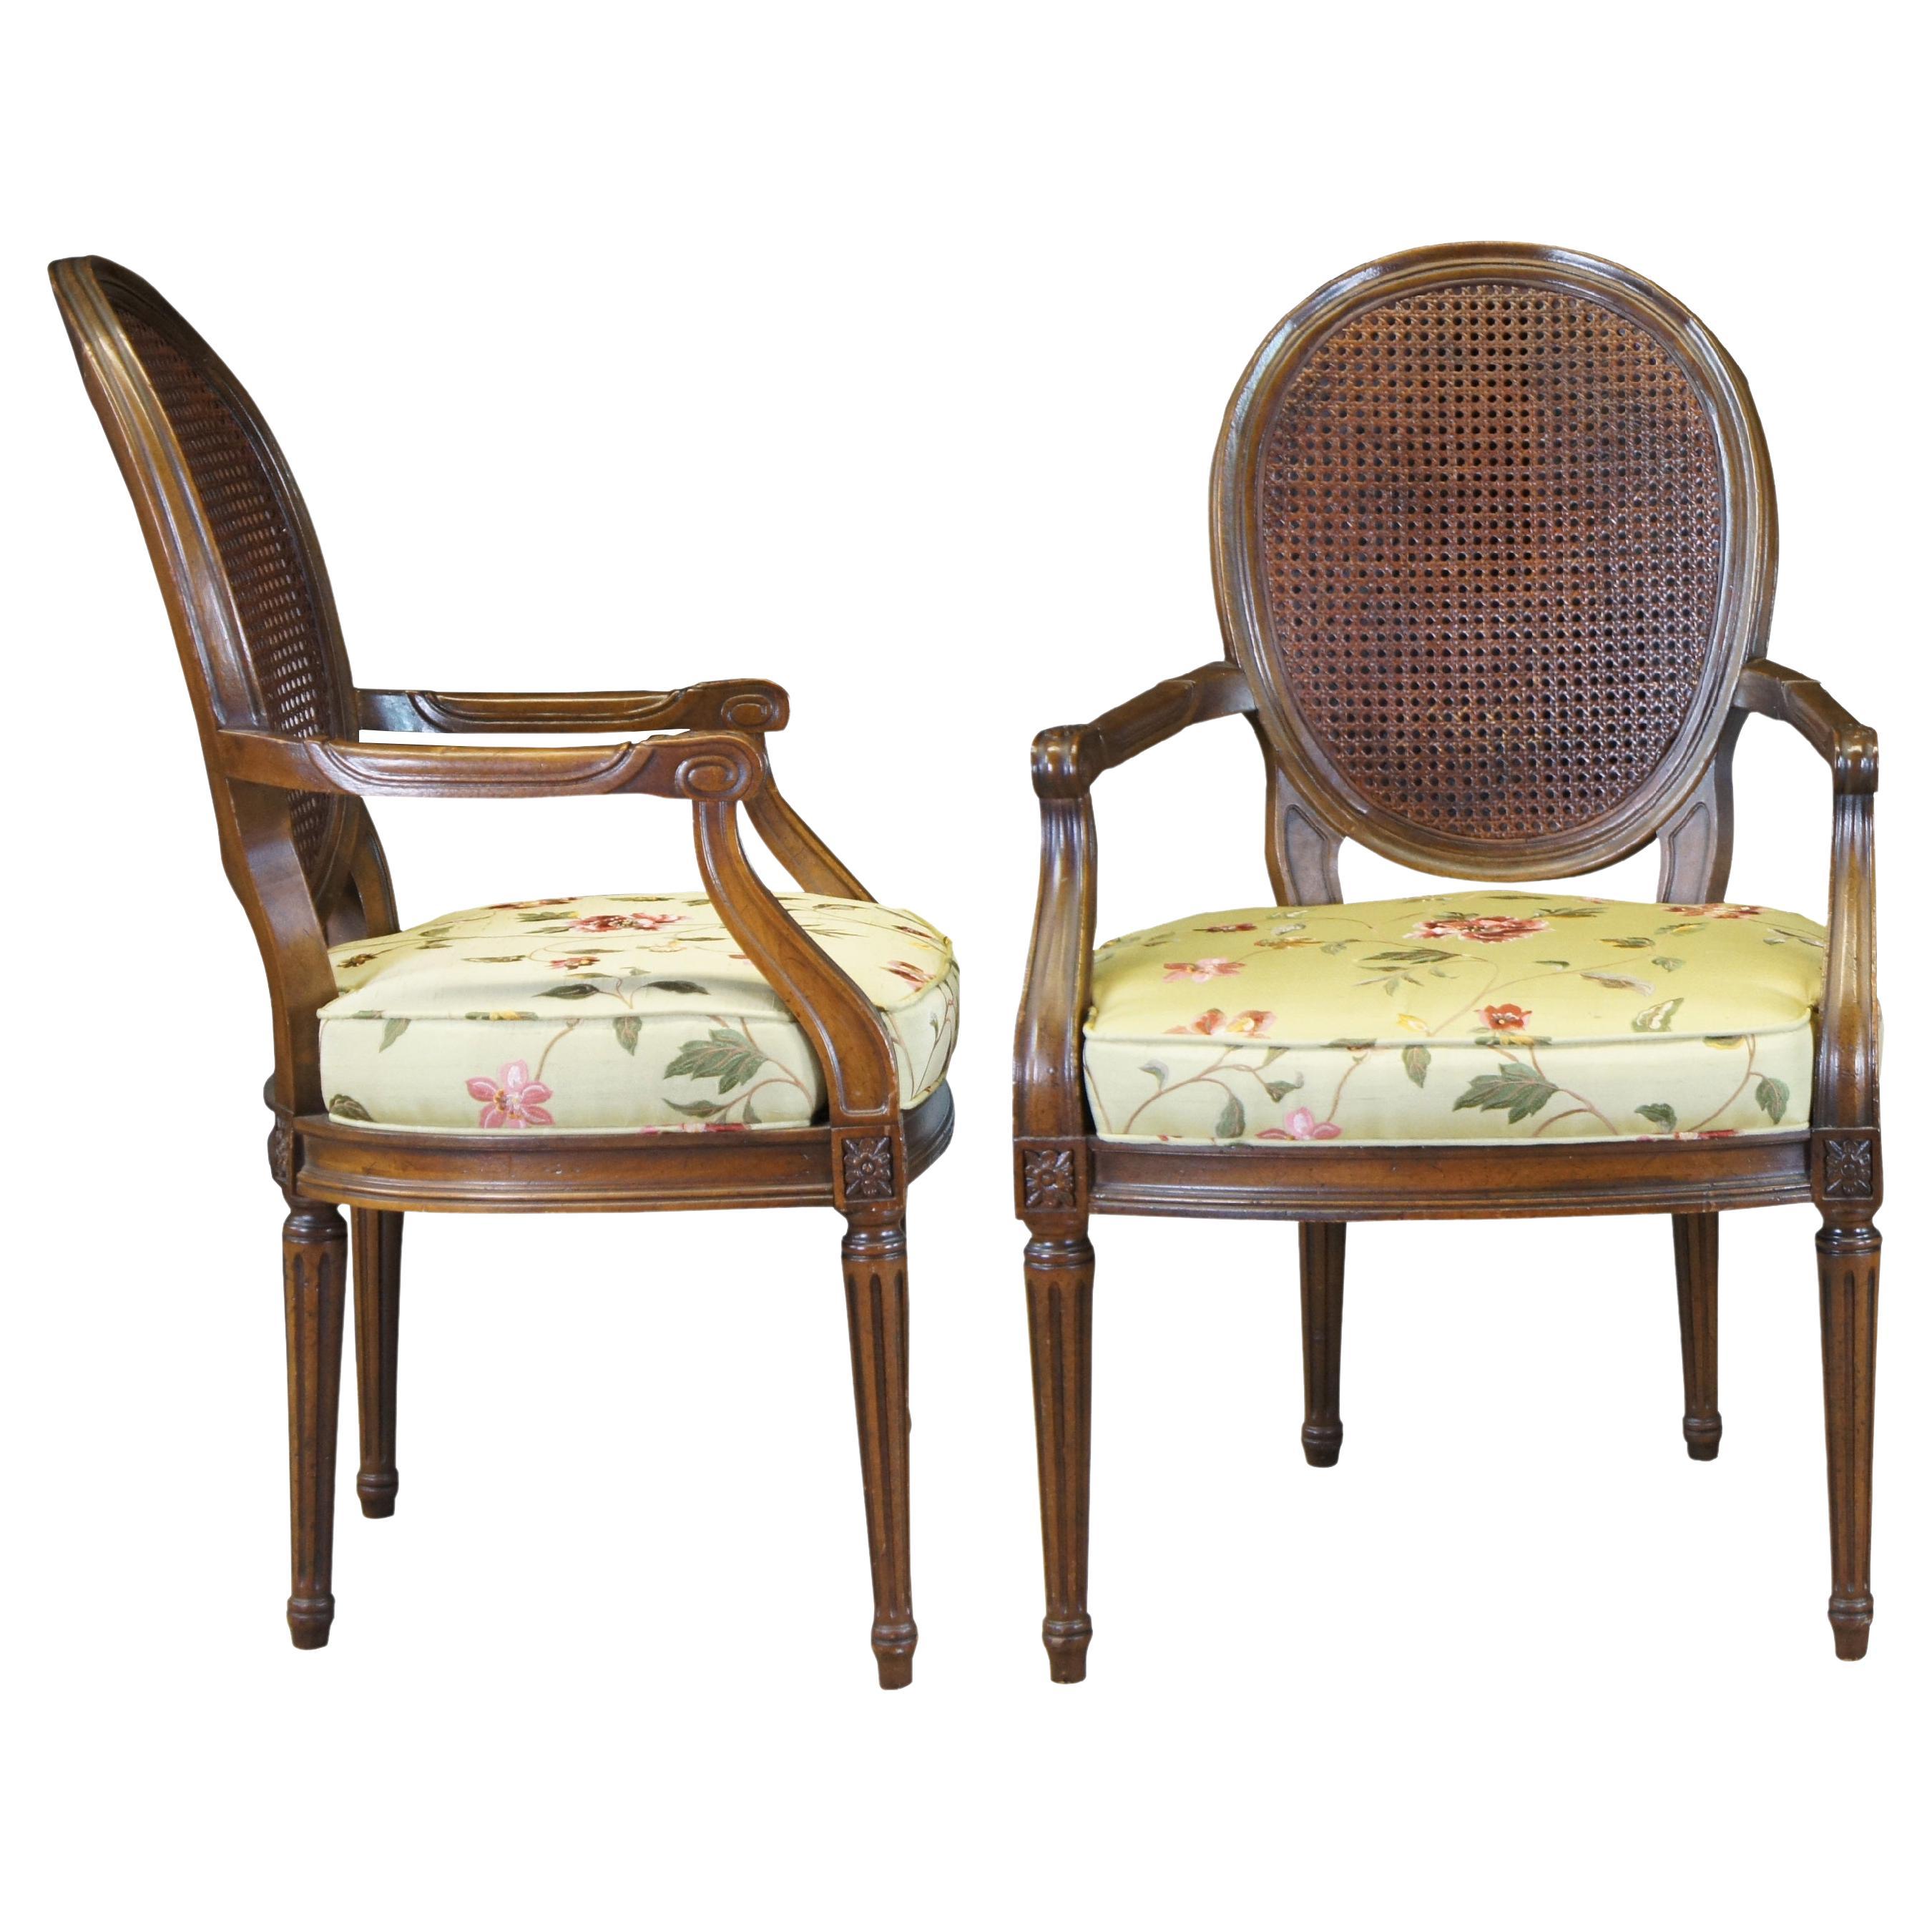 Two vintage French Louis XV armchairs. Made of walnut featuring caned oval balloon backs with a fauteuil style arm, floral / acanthus carved accents, and tapered fluted legs.
 